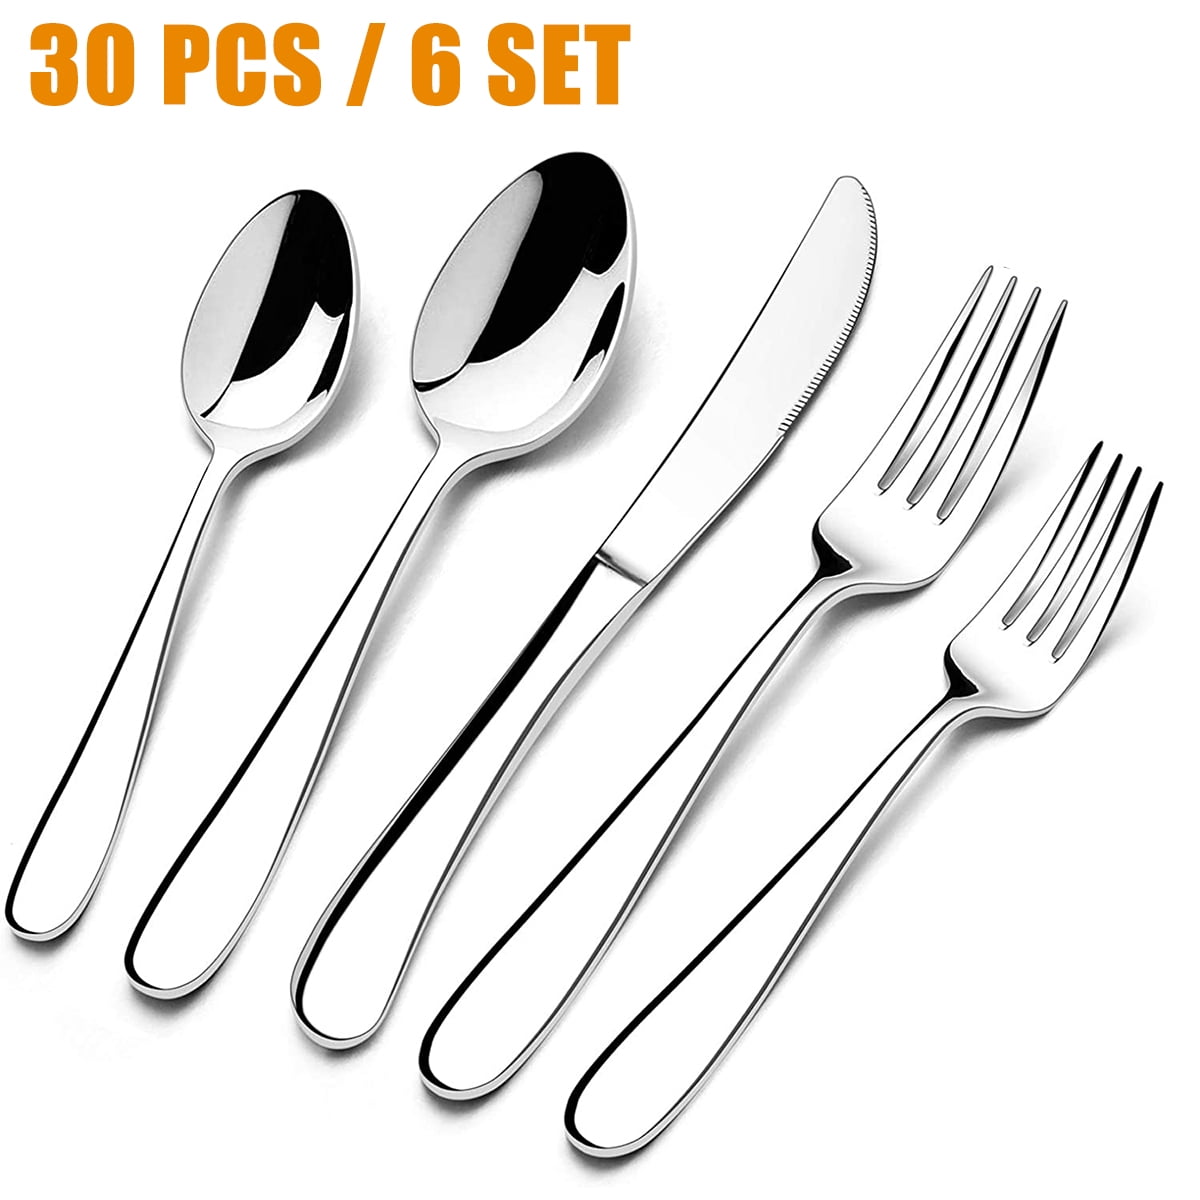 30 Pieces Silverware Set with Serving Set, Stainless Steel Modern Flatware, Service for 6